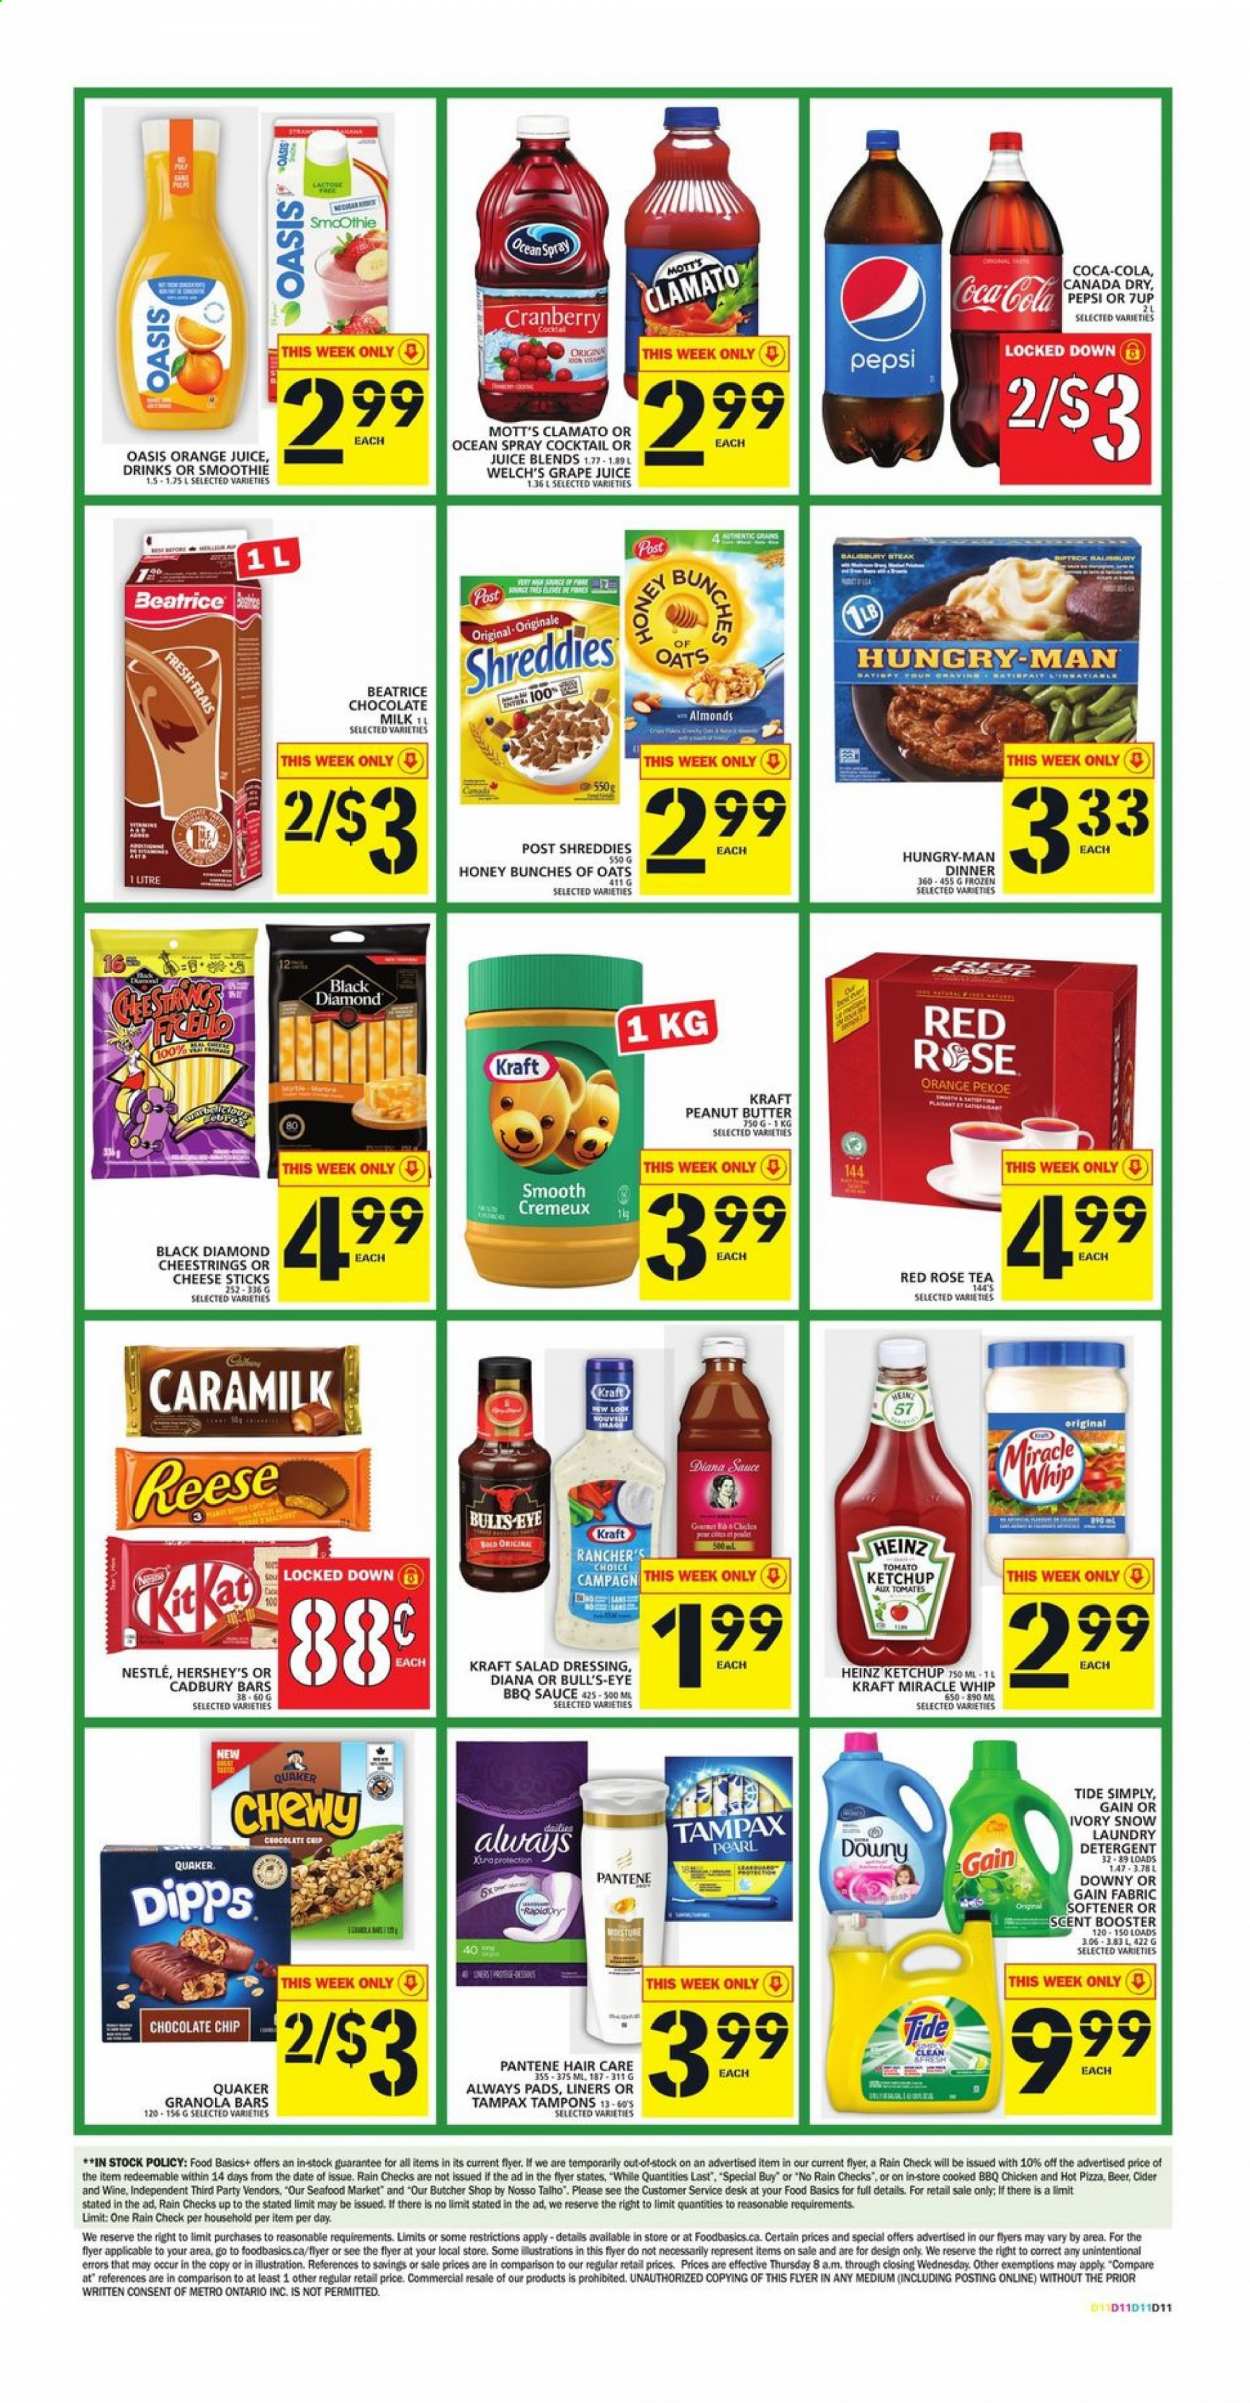 thumbnail - Food Basics Flyer - July 29, 2021 - August 04, 2021 - Sales products - Welch's, Mott's, seafood, pizza, sauce, Quaker, Kraft®, string cheese, milk, Miracle Whip, Hershey's, cheese sticks, chocolate chips, KitKat, Cadbury, Heinz, granola bar, BBQ sauce, salad dressing, dressing, peanut butter, Canada Dry, Coca-Cola, Pepsi, orange juice, juice, Clamato, 7UP, smoothie, tea, rosé wine, cider, beer, Gain, Tide, fabric softener, laundry detergent, Always pads, tampons, straw, Nestlé, Tampax, Pantene, steak. Page 4.